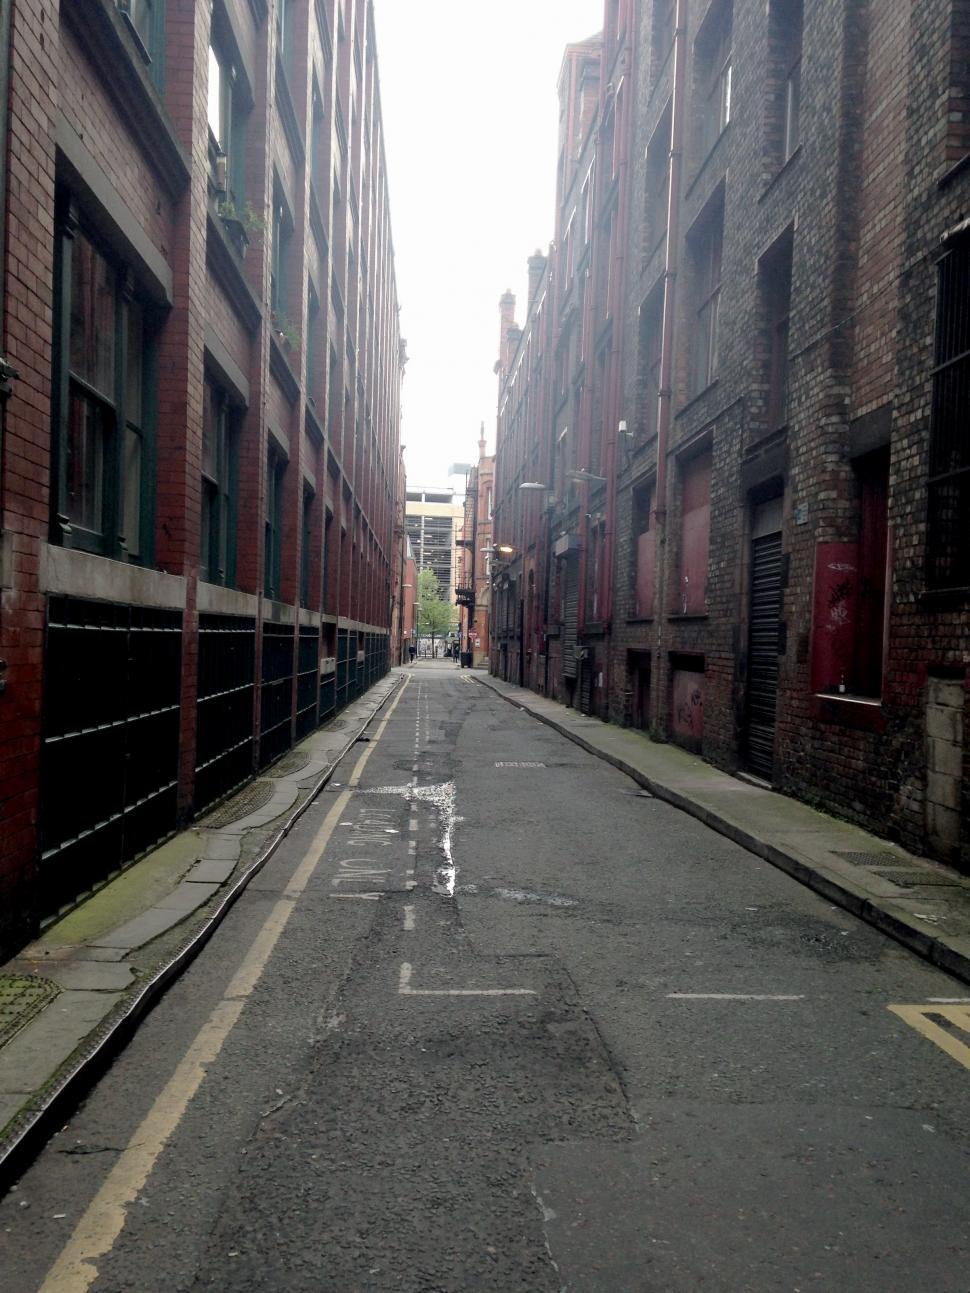 Free Image of Northern Quarter Street, Manchester  